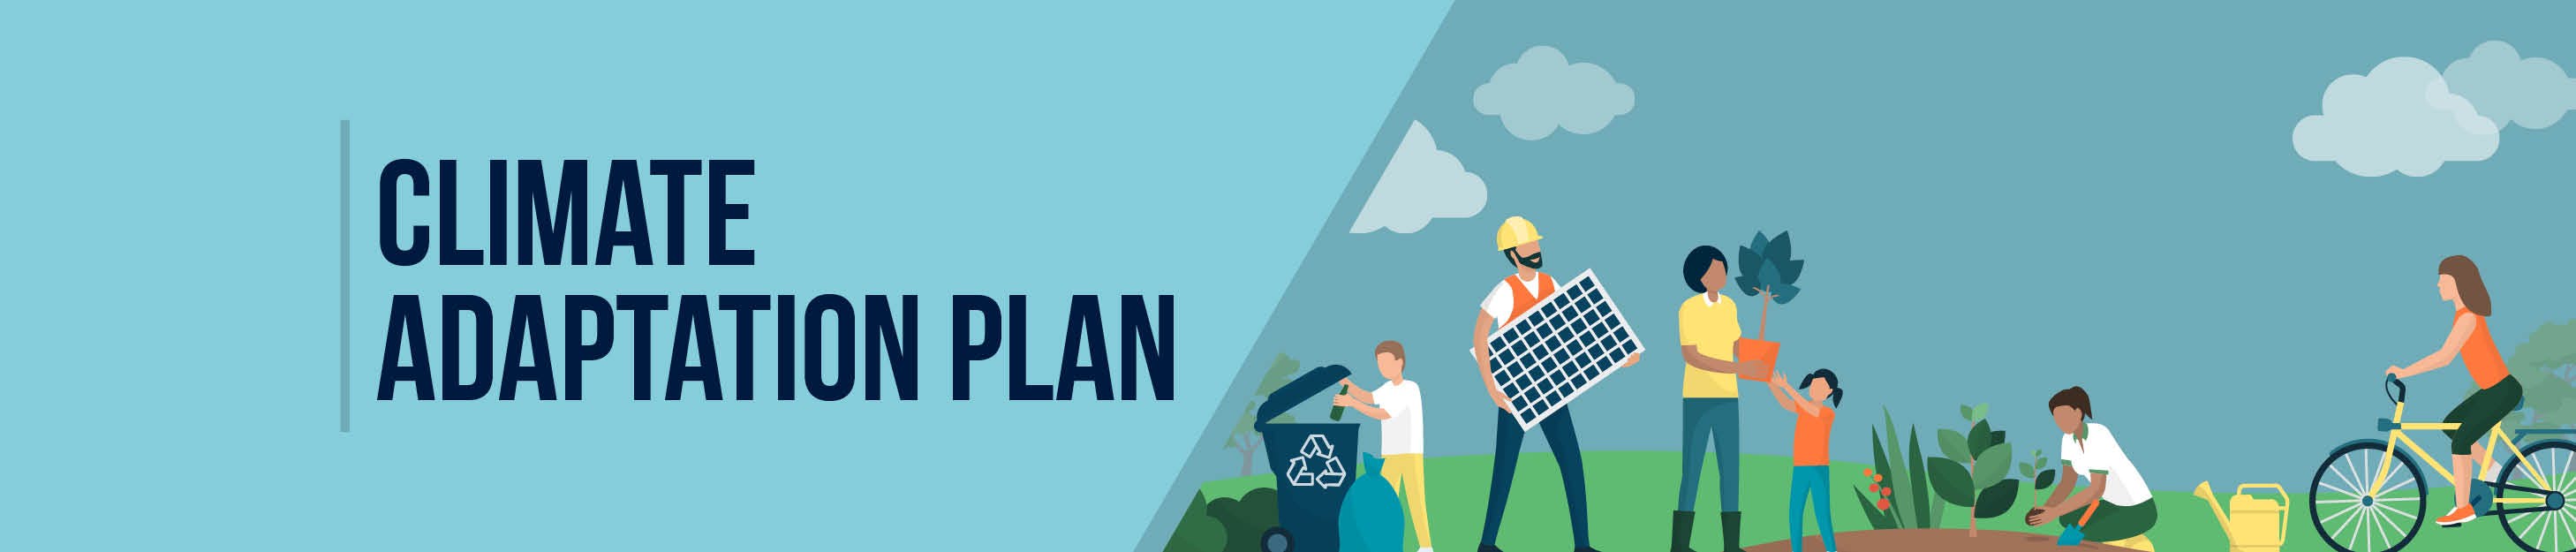 Illustration of people doing various activities outdoors - man recycling, family planting, woman cycling & construction worker carrying solar panel